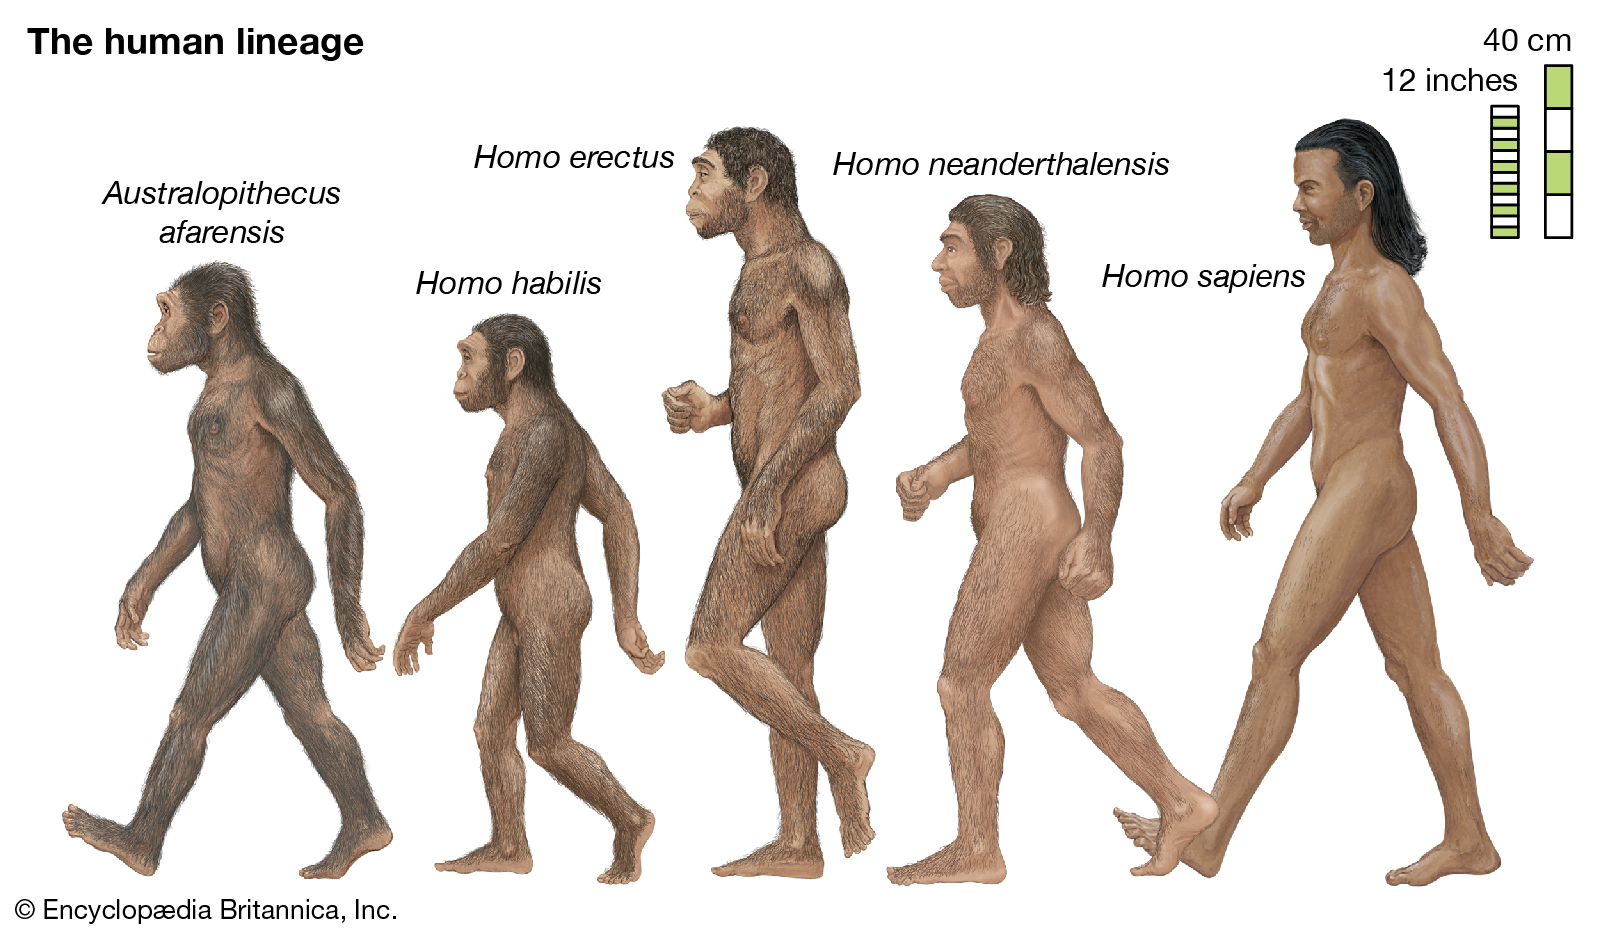 What is the meaning of Homo sapiens?